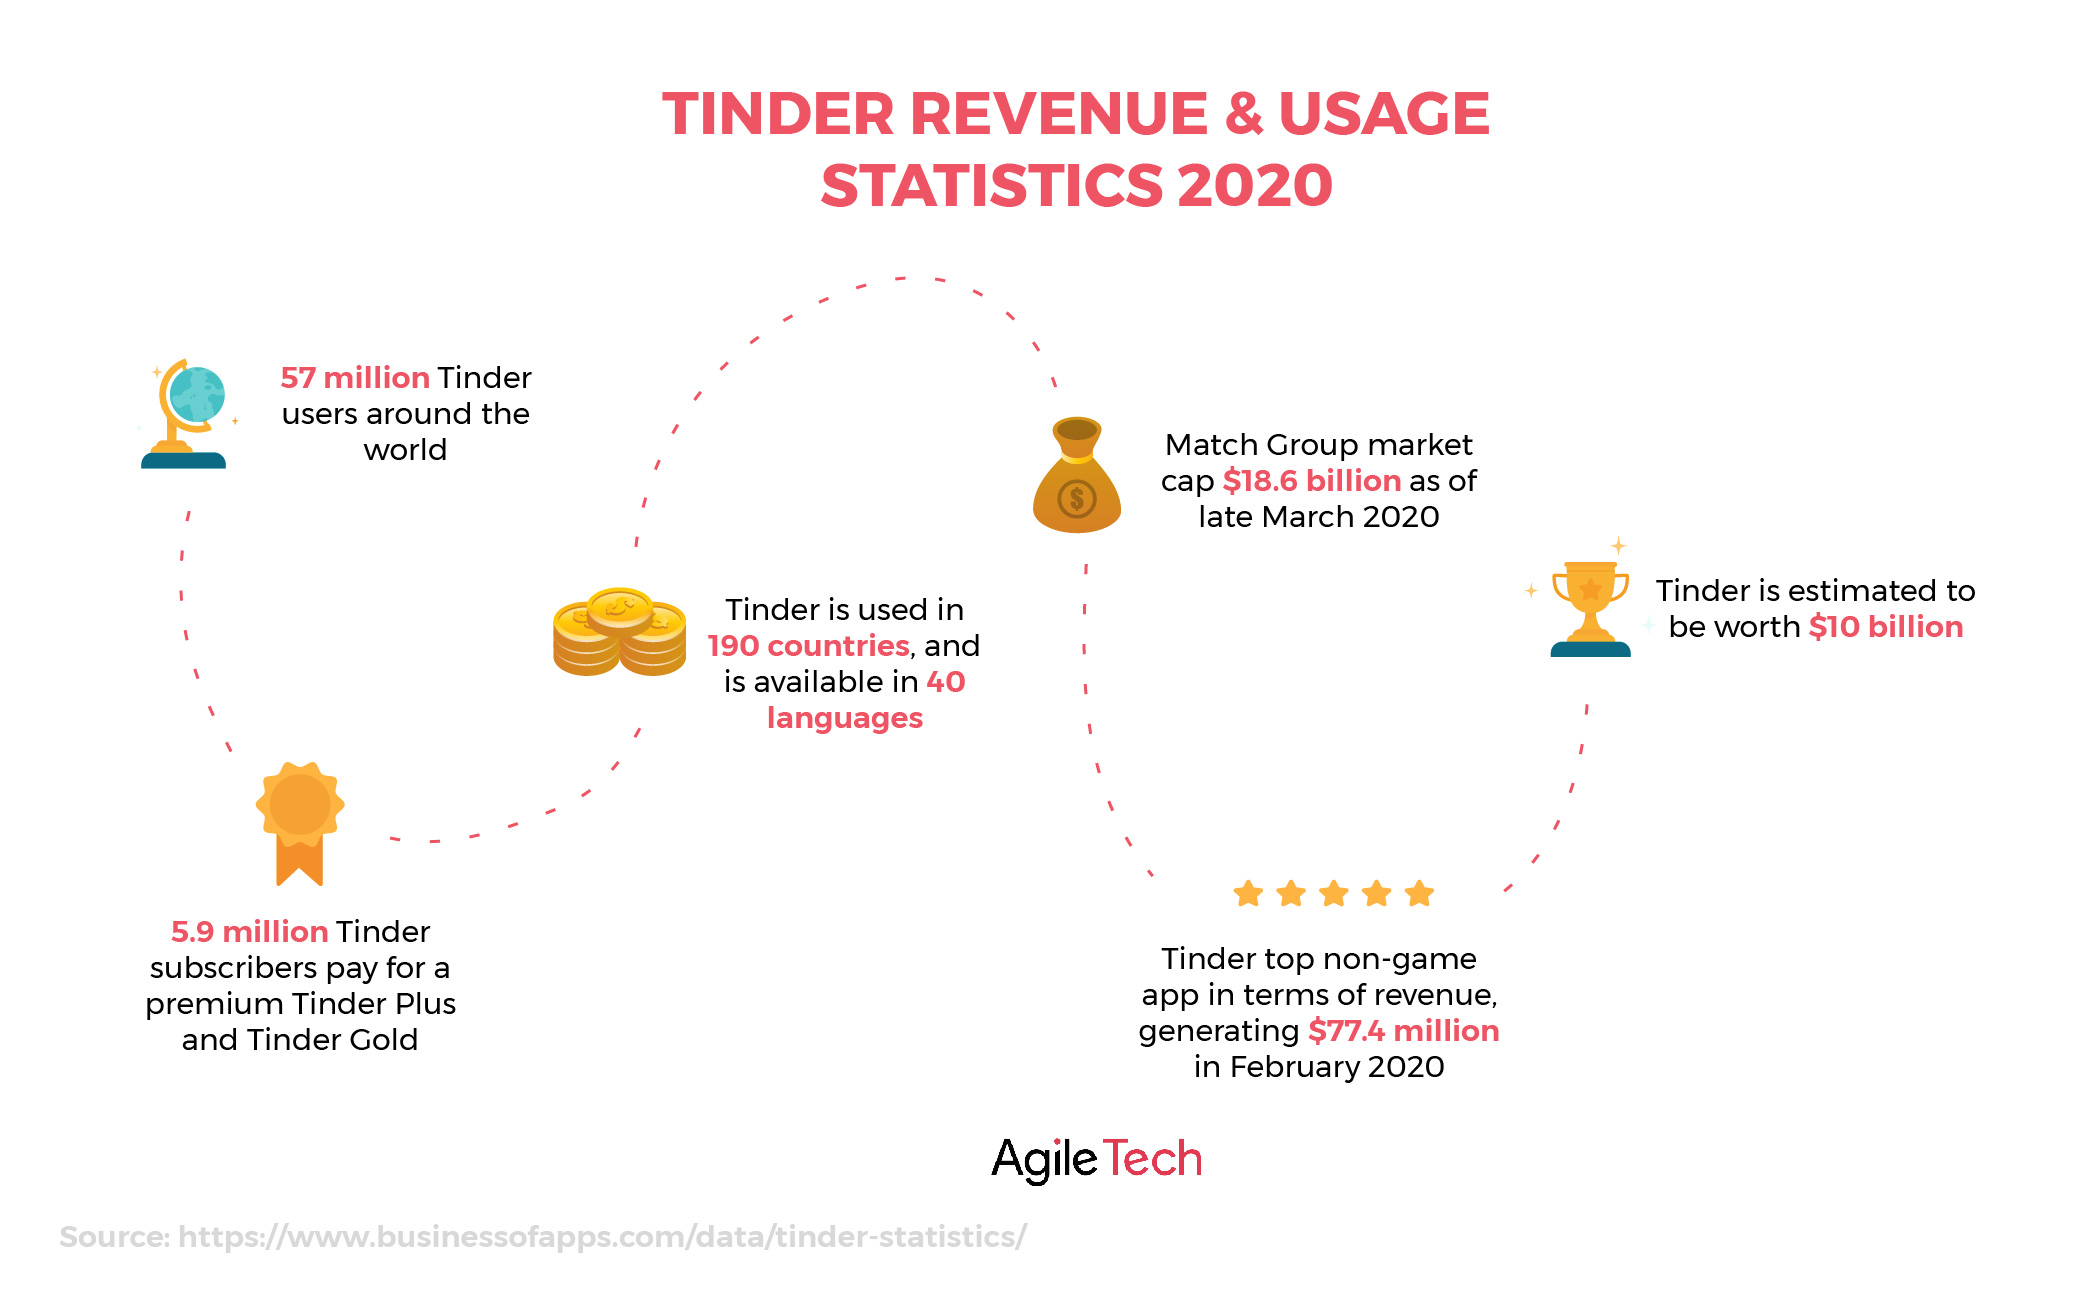 tinder revenue and usage statistics 2020 by agiletech